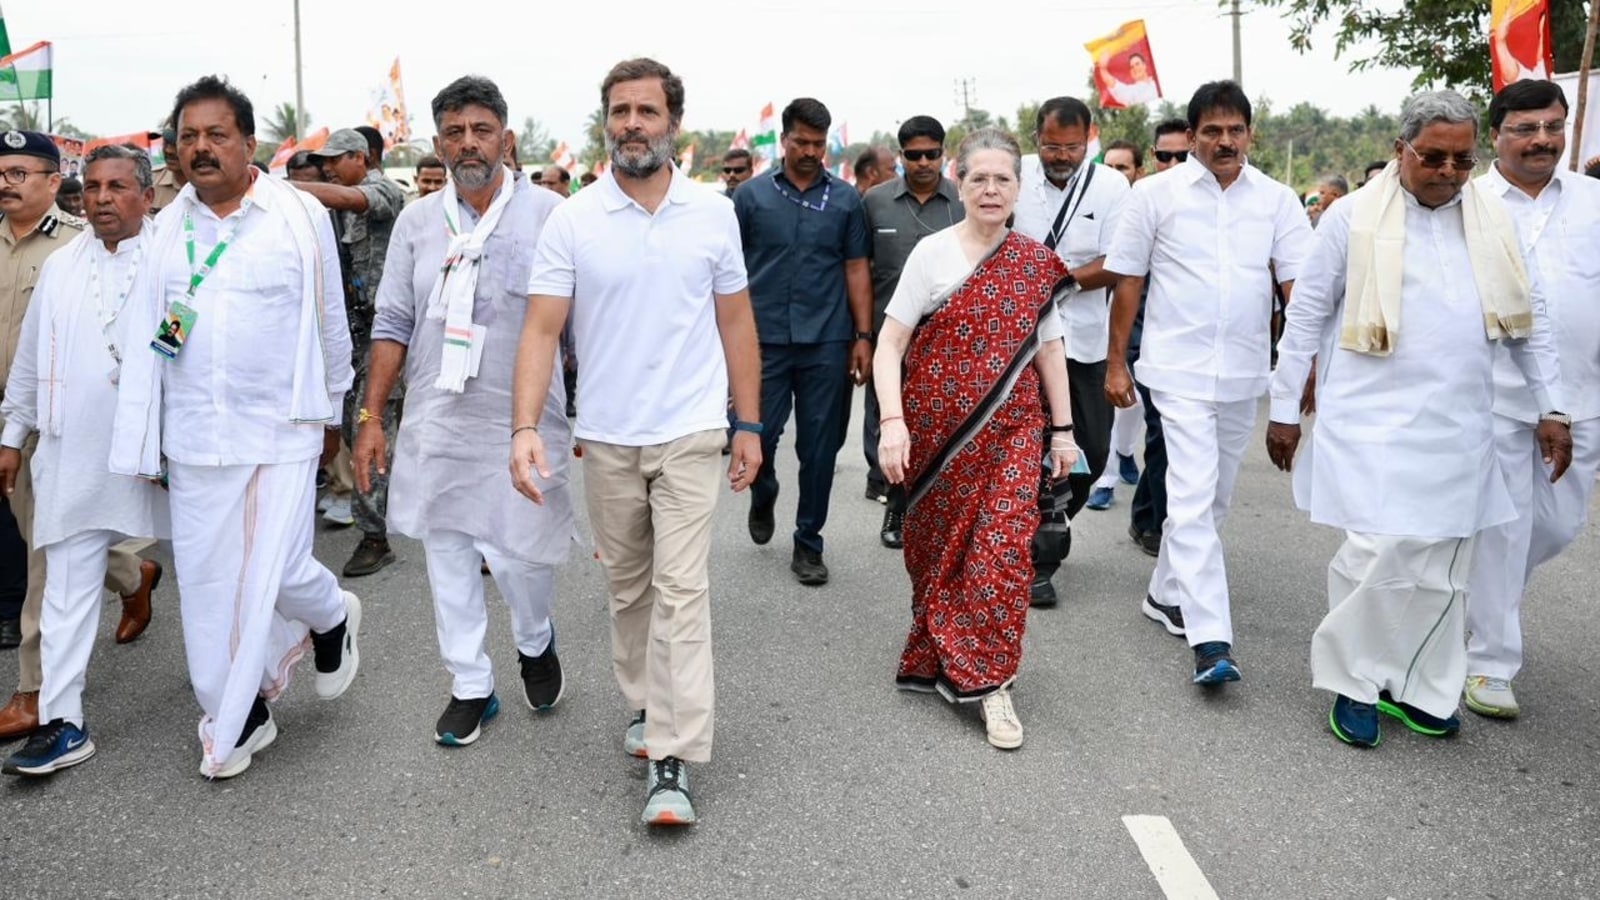 Sonia Gandhi joins Rahul in Bharat Jodo Yatra, 'We are proud,' say Cong leaders | Latest News India - Hindustan Times